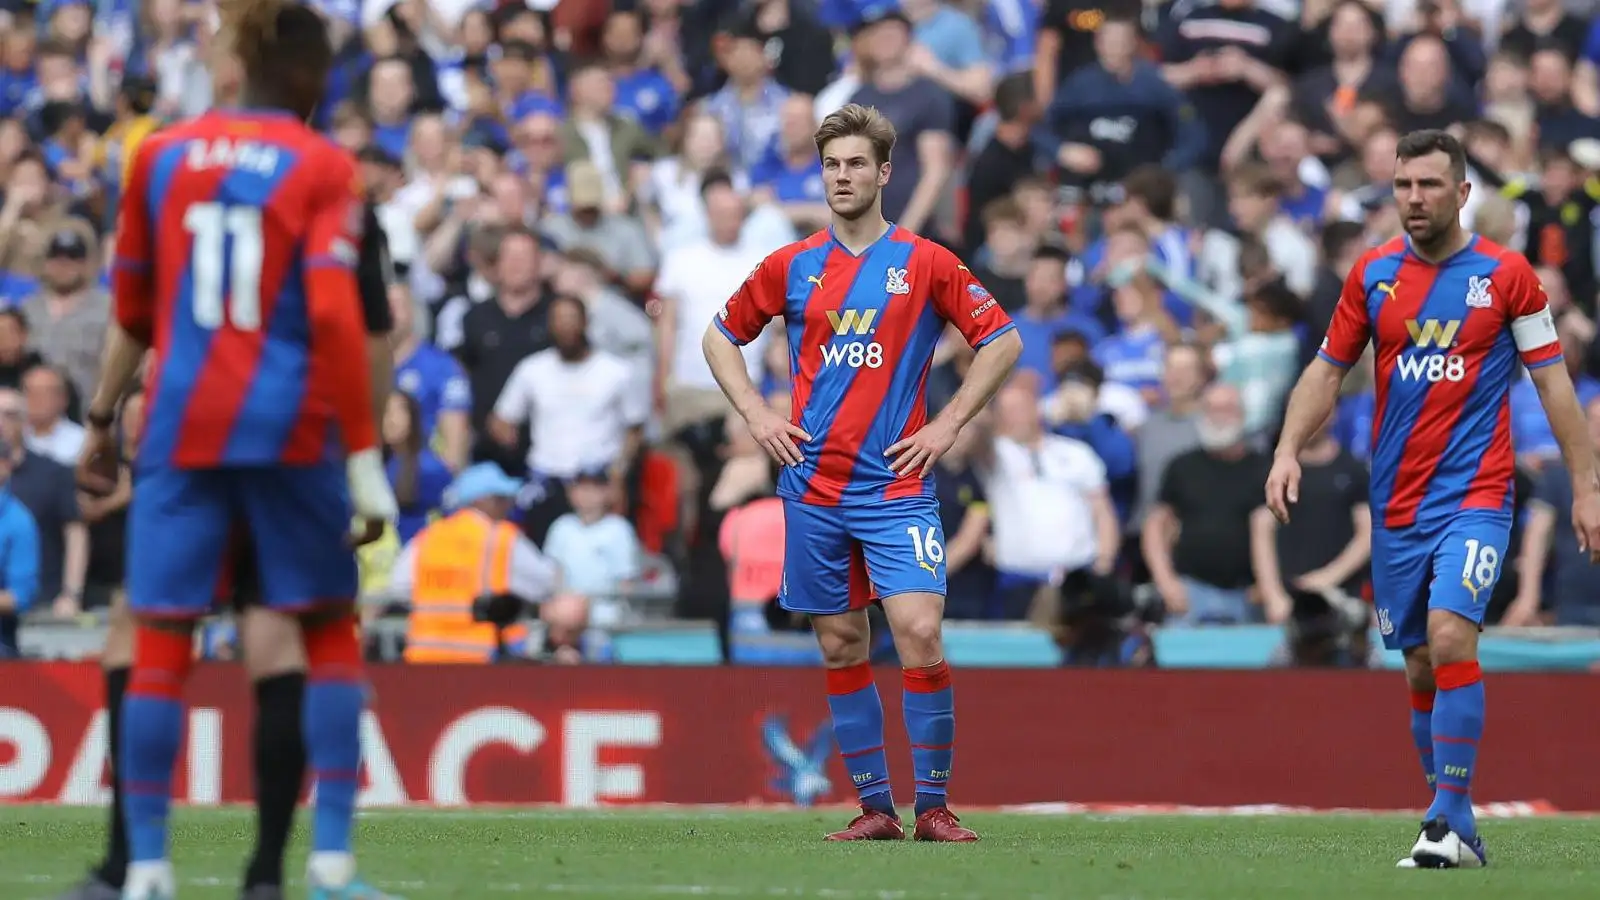 Disappointment for Crystal Palace after FA Cup semi-final defeat to Chelsea